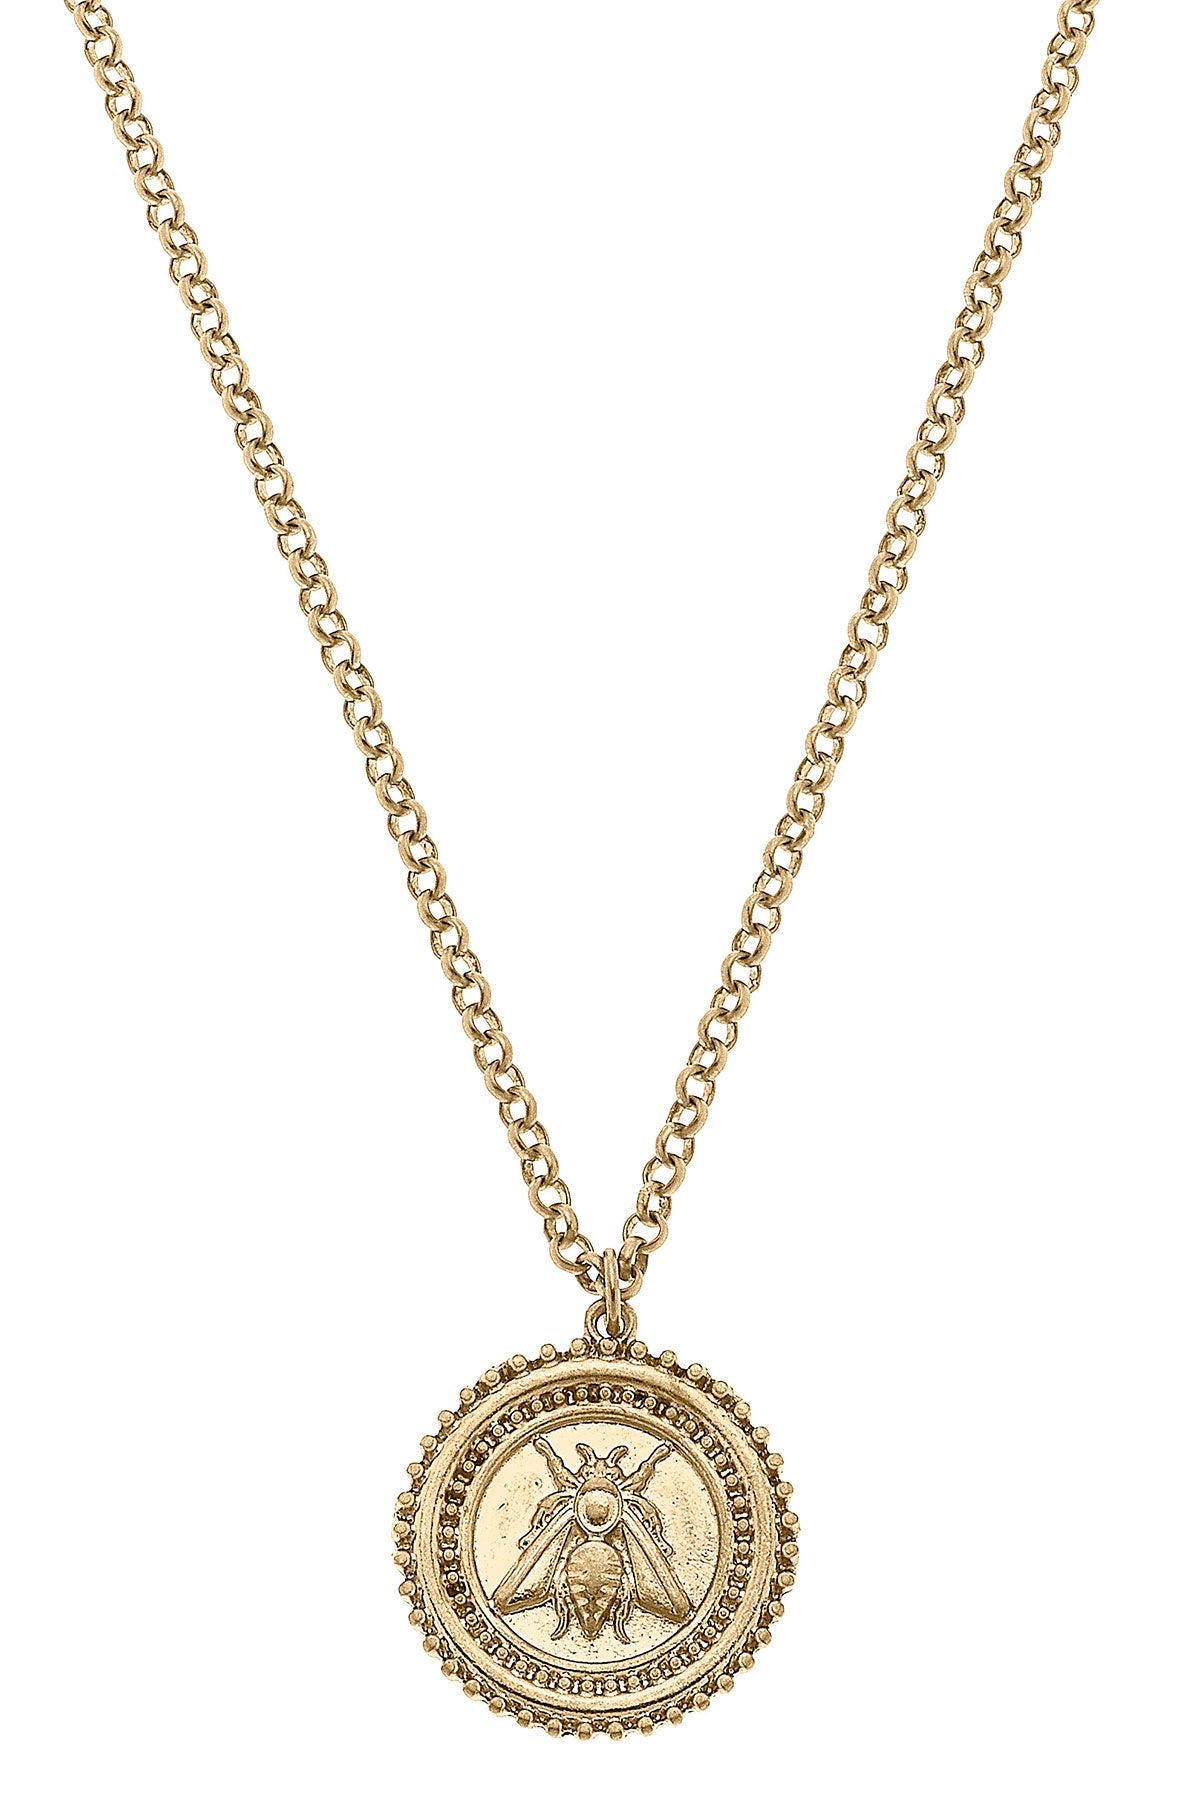 Lizette Bee Medallion Pendant Necklace in Worn Gold by CANVAS